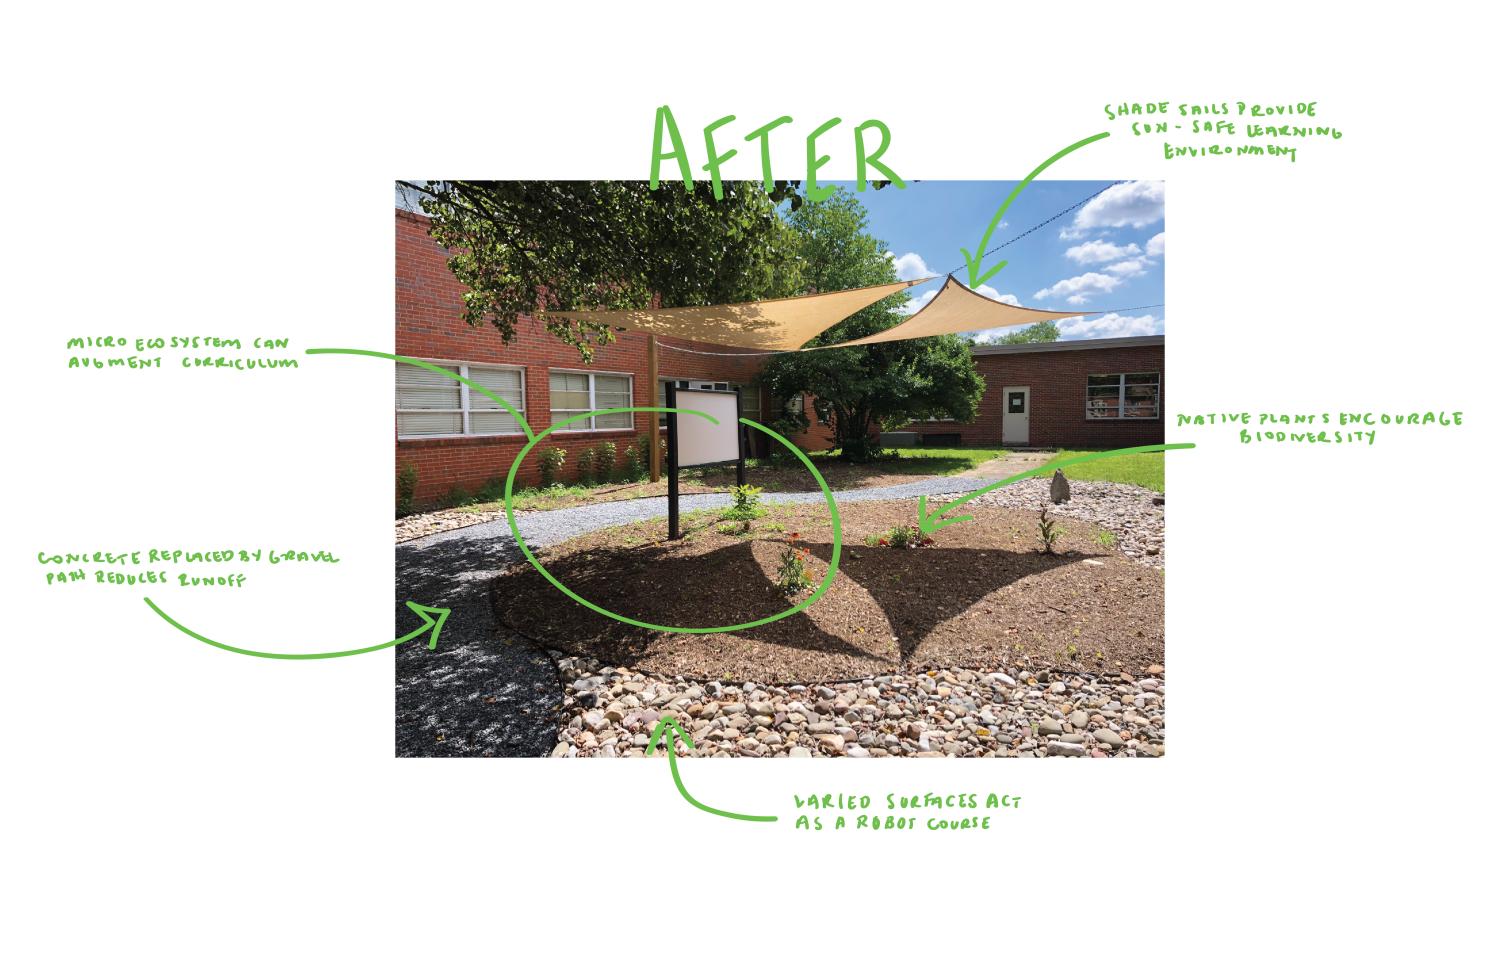 After: Micro ecosystems can augment curriculum, concrete replaced by gravel path reduces runoff, shade sails provide sun-safe learning environment, native plants encourage biodiversity. 